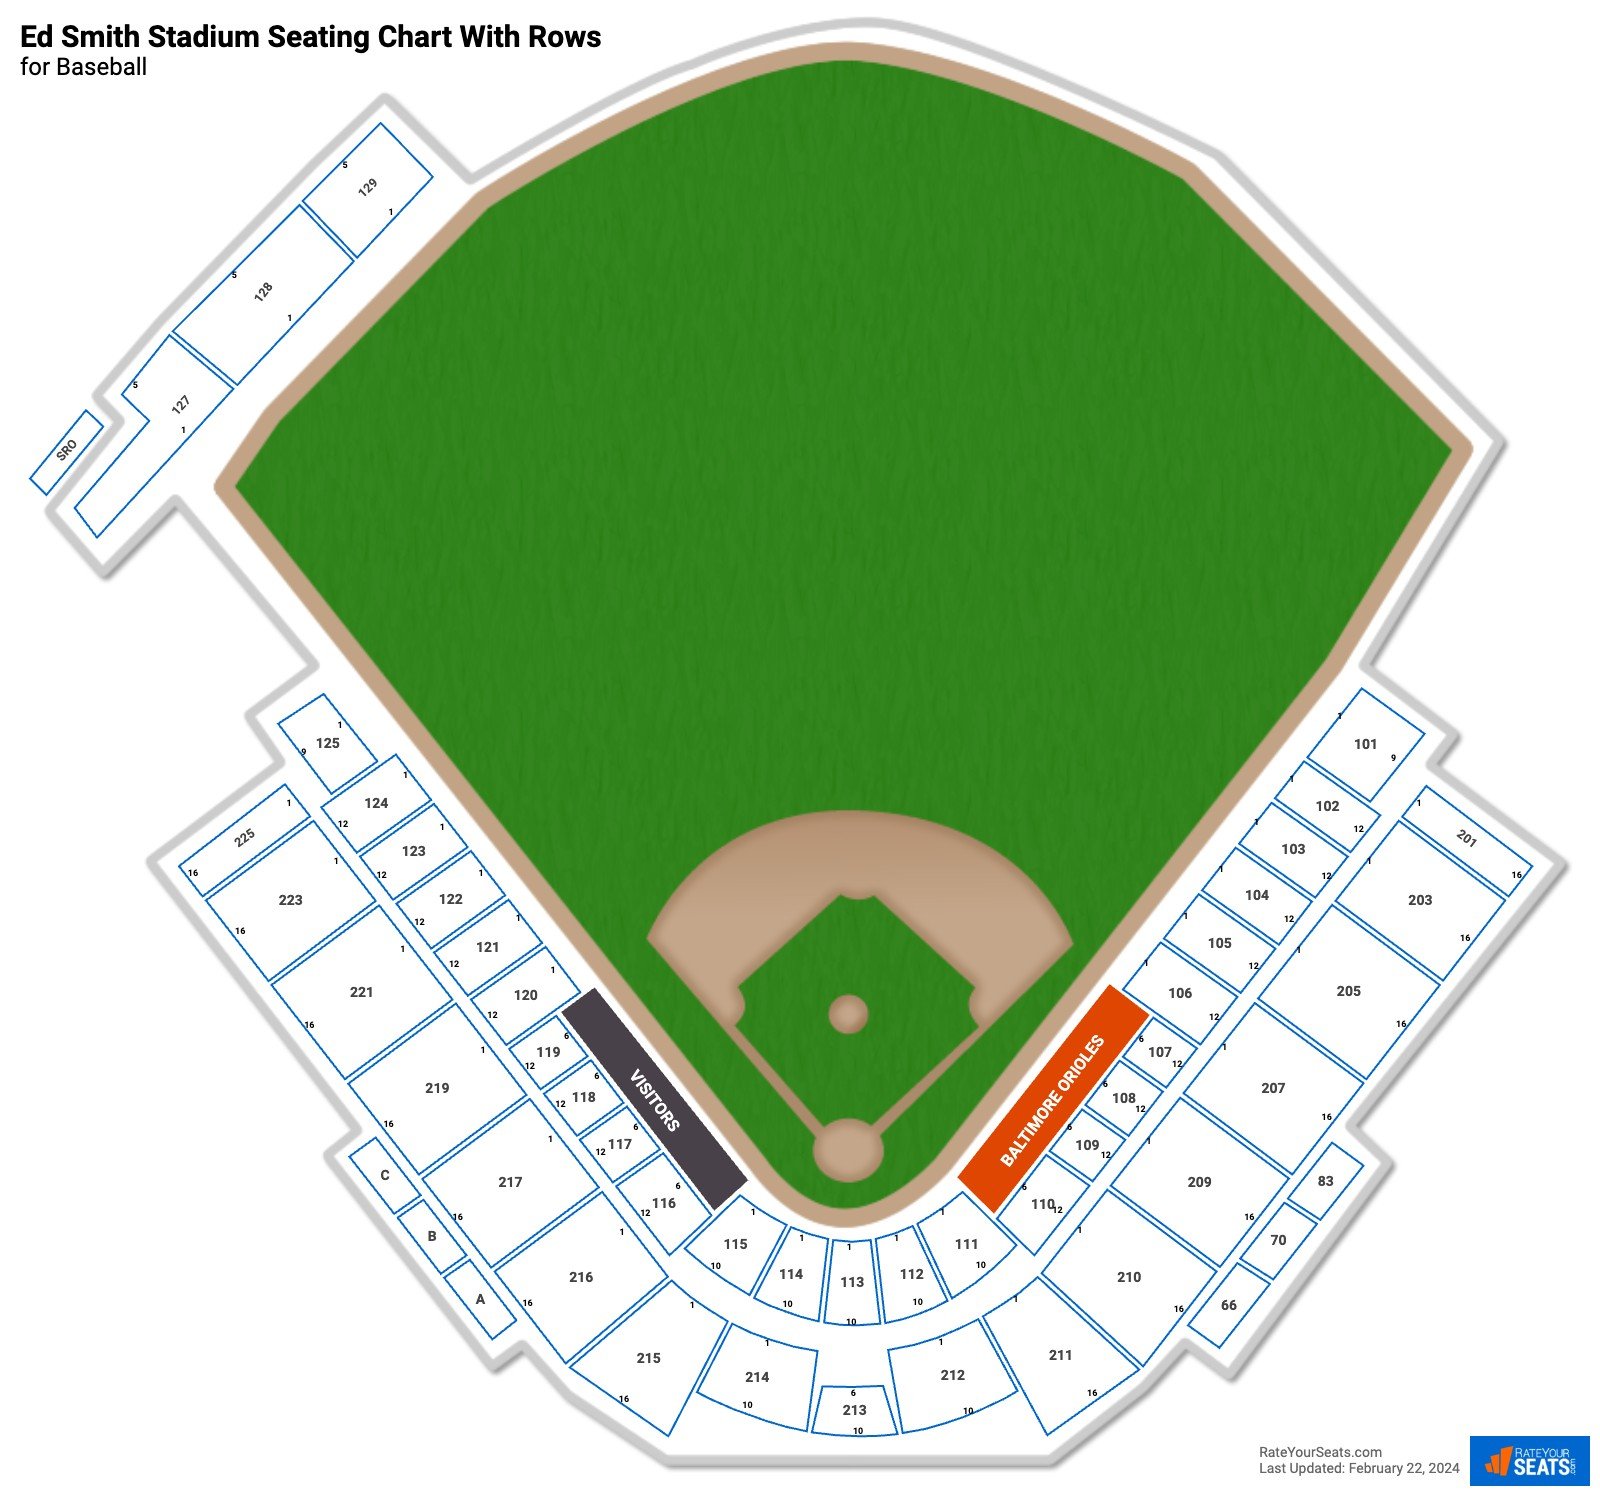 Ed Smith Stadium seating chart with row numbers